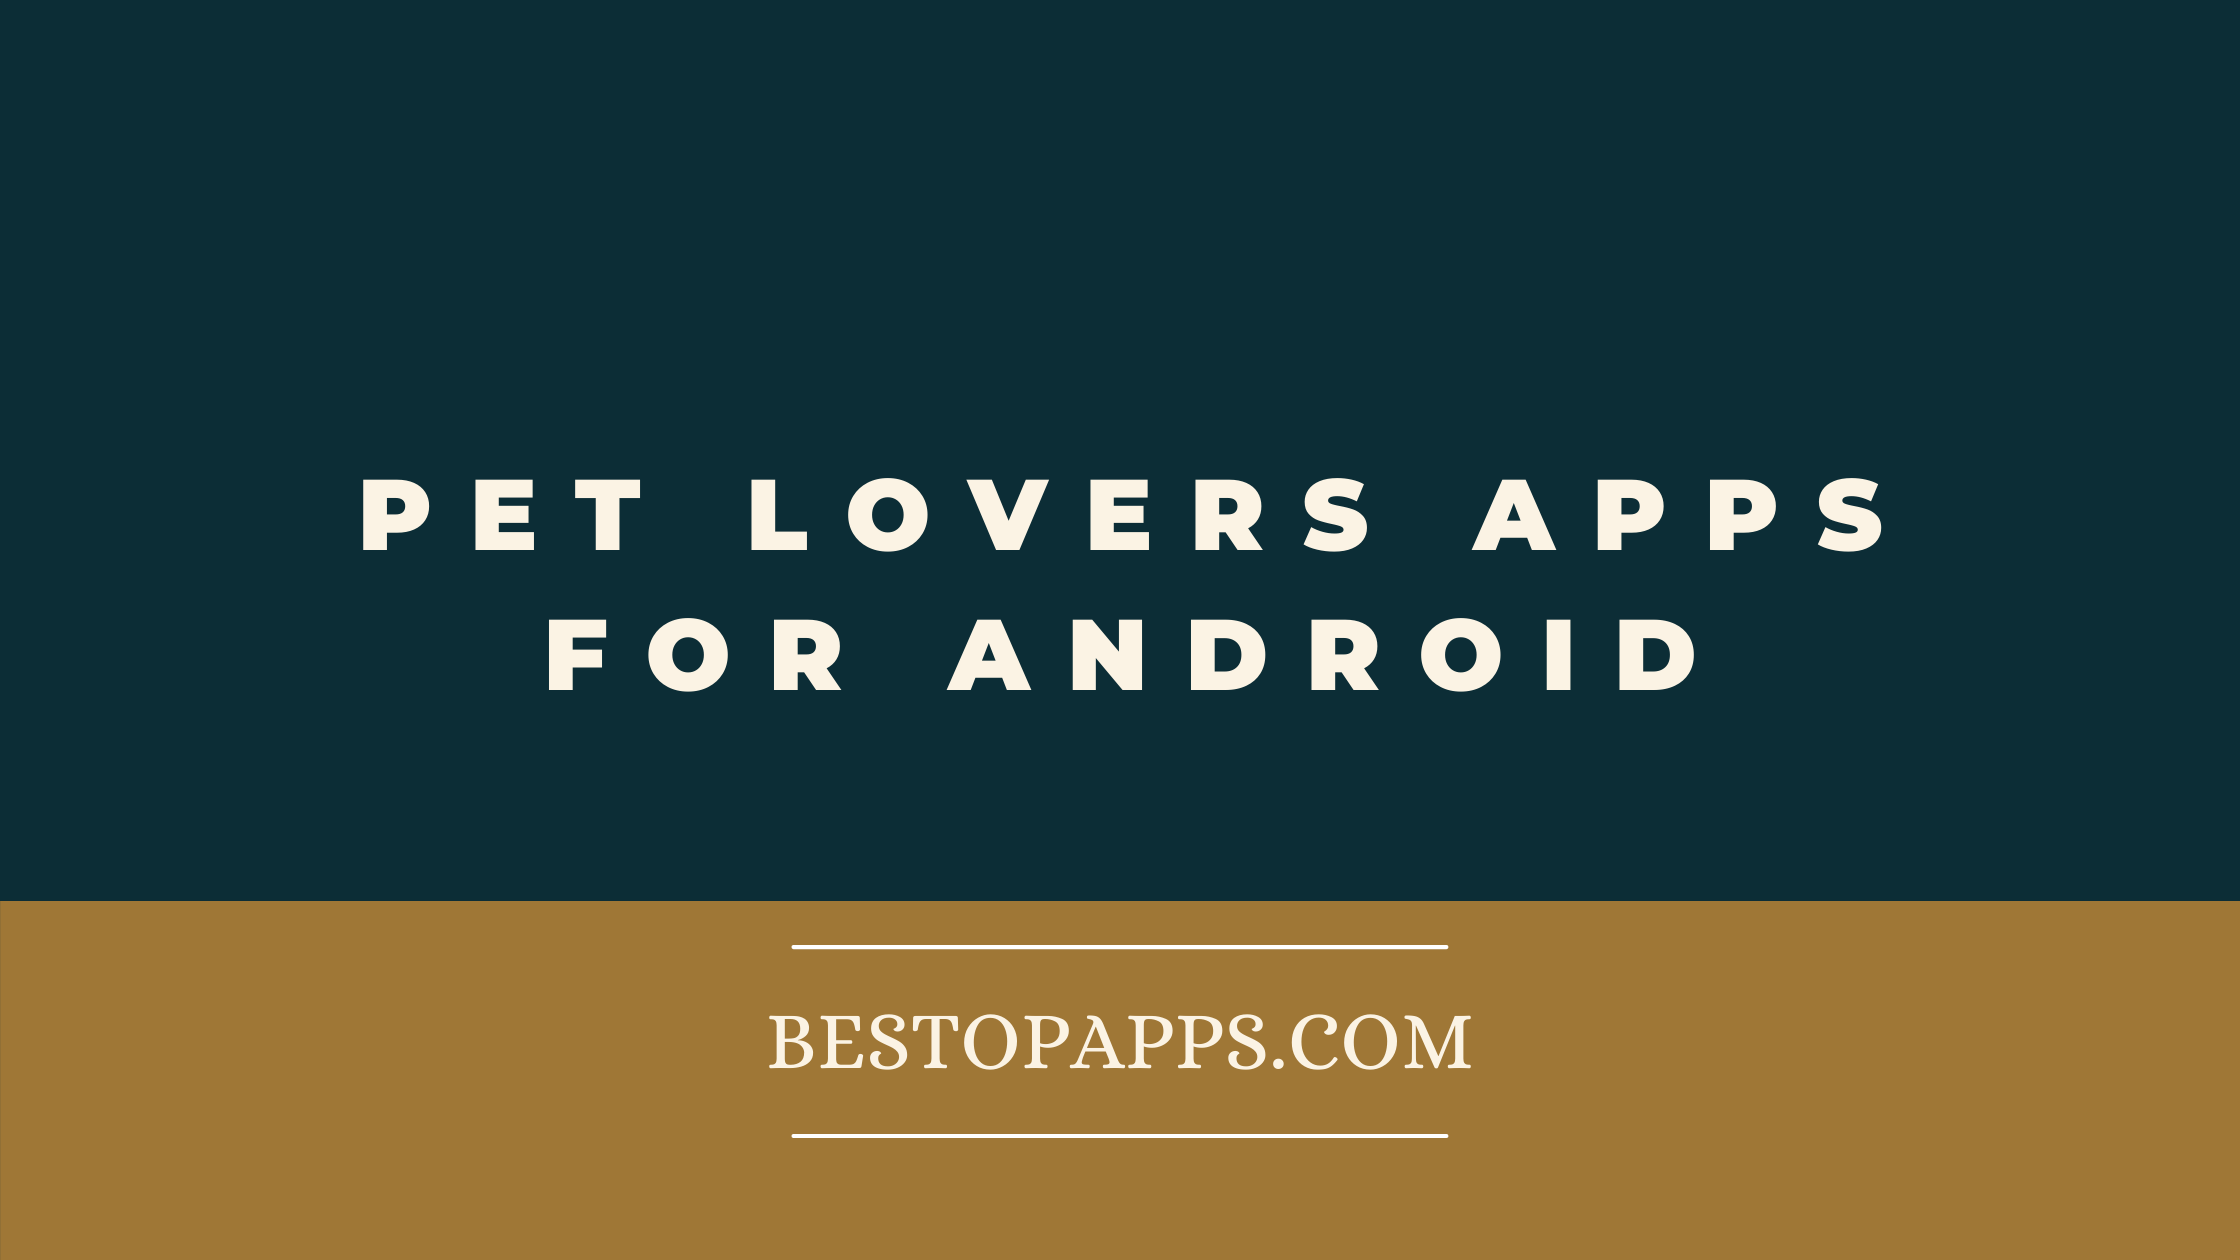 Pet Lovers Apps for Android